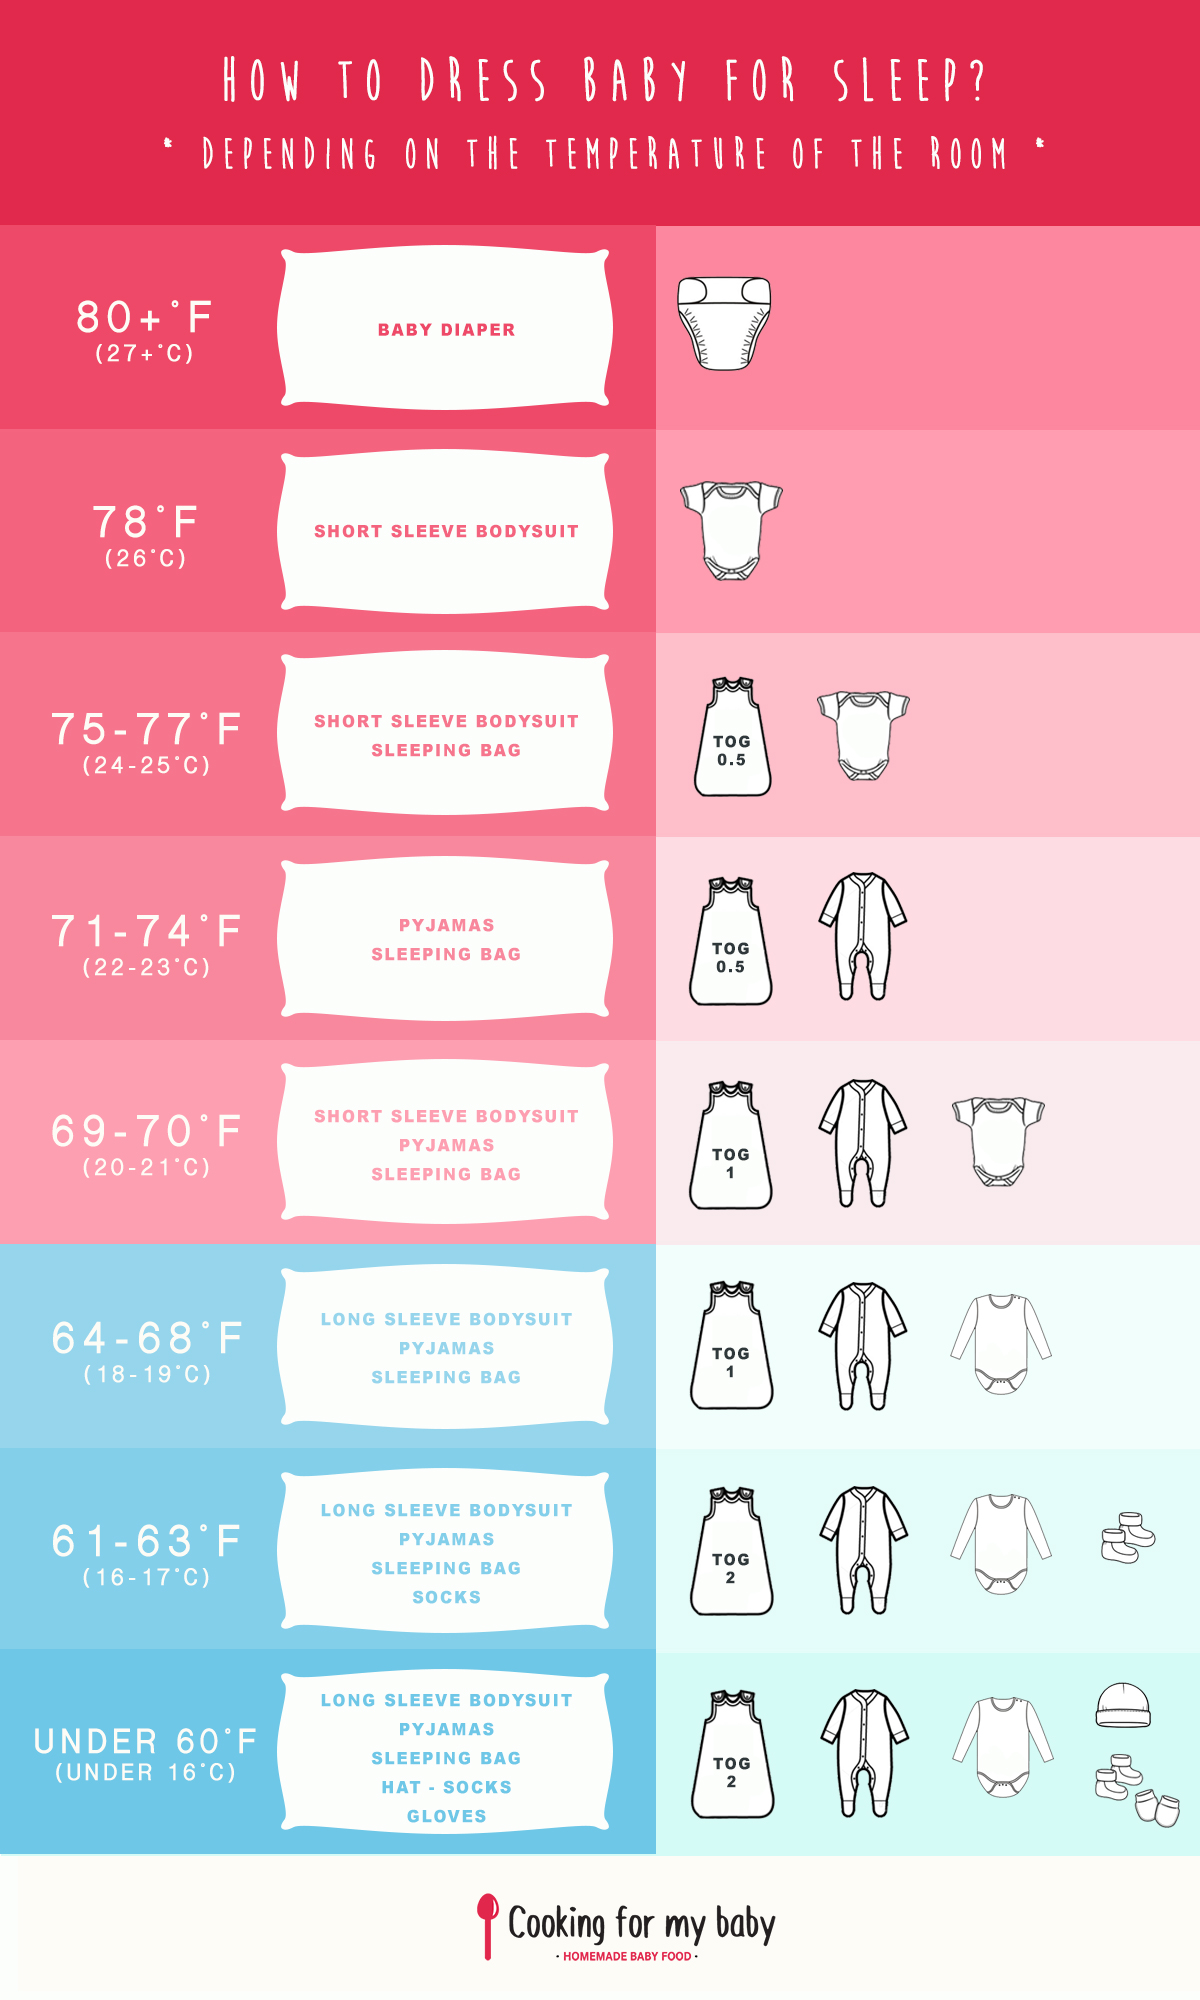 What To Dress Baby In For Sleep At Night Depending On The Temperature Of The Room Cooking For My Baby